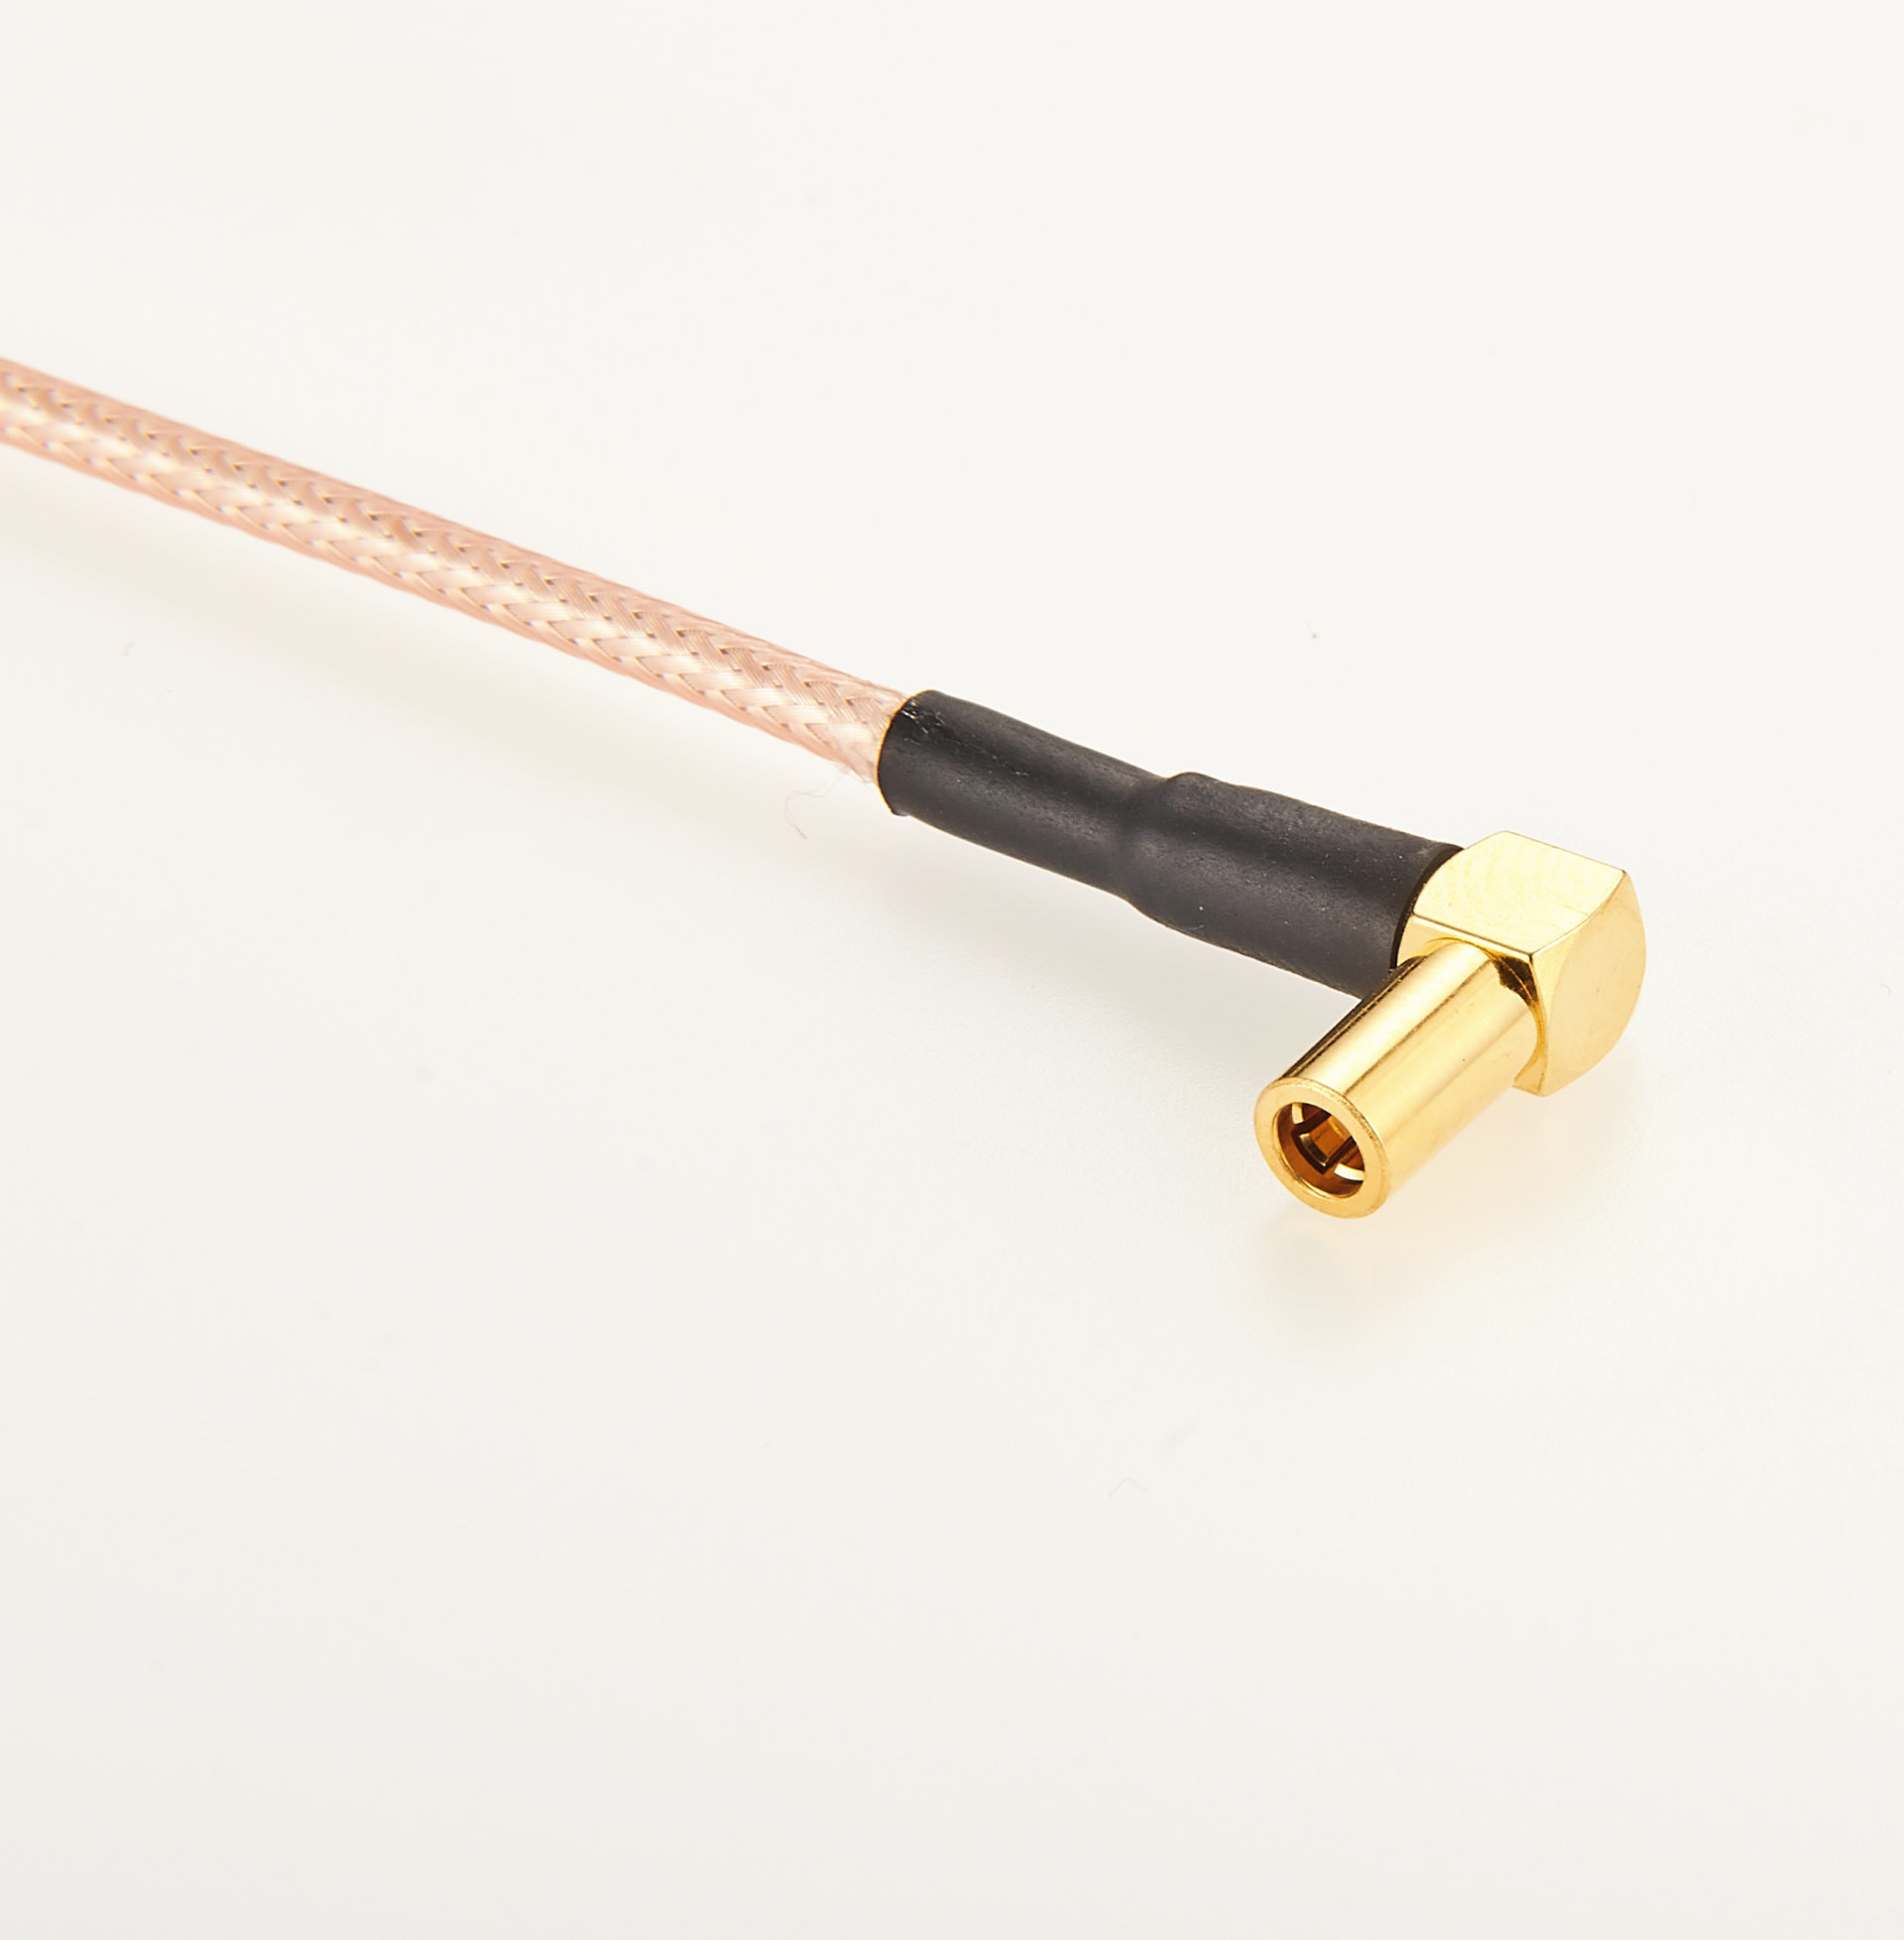 customized SMB Cable from China manufacturer